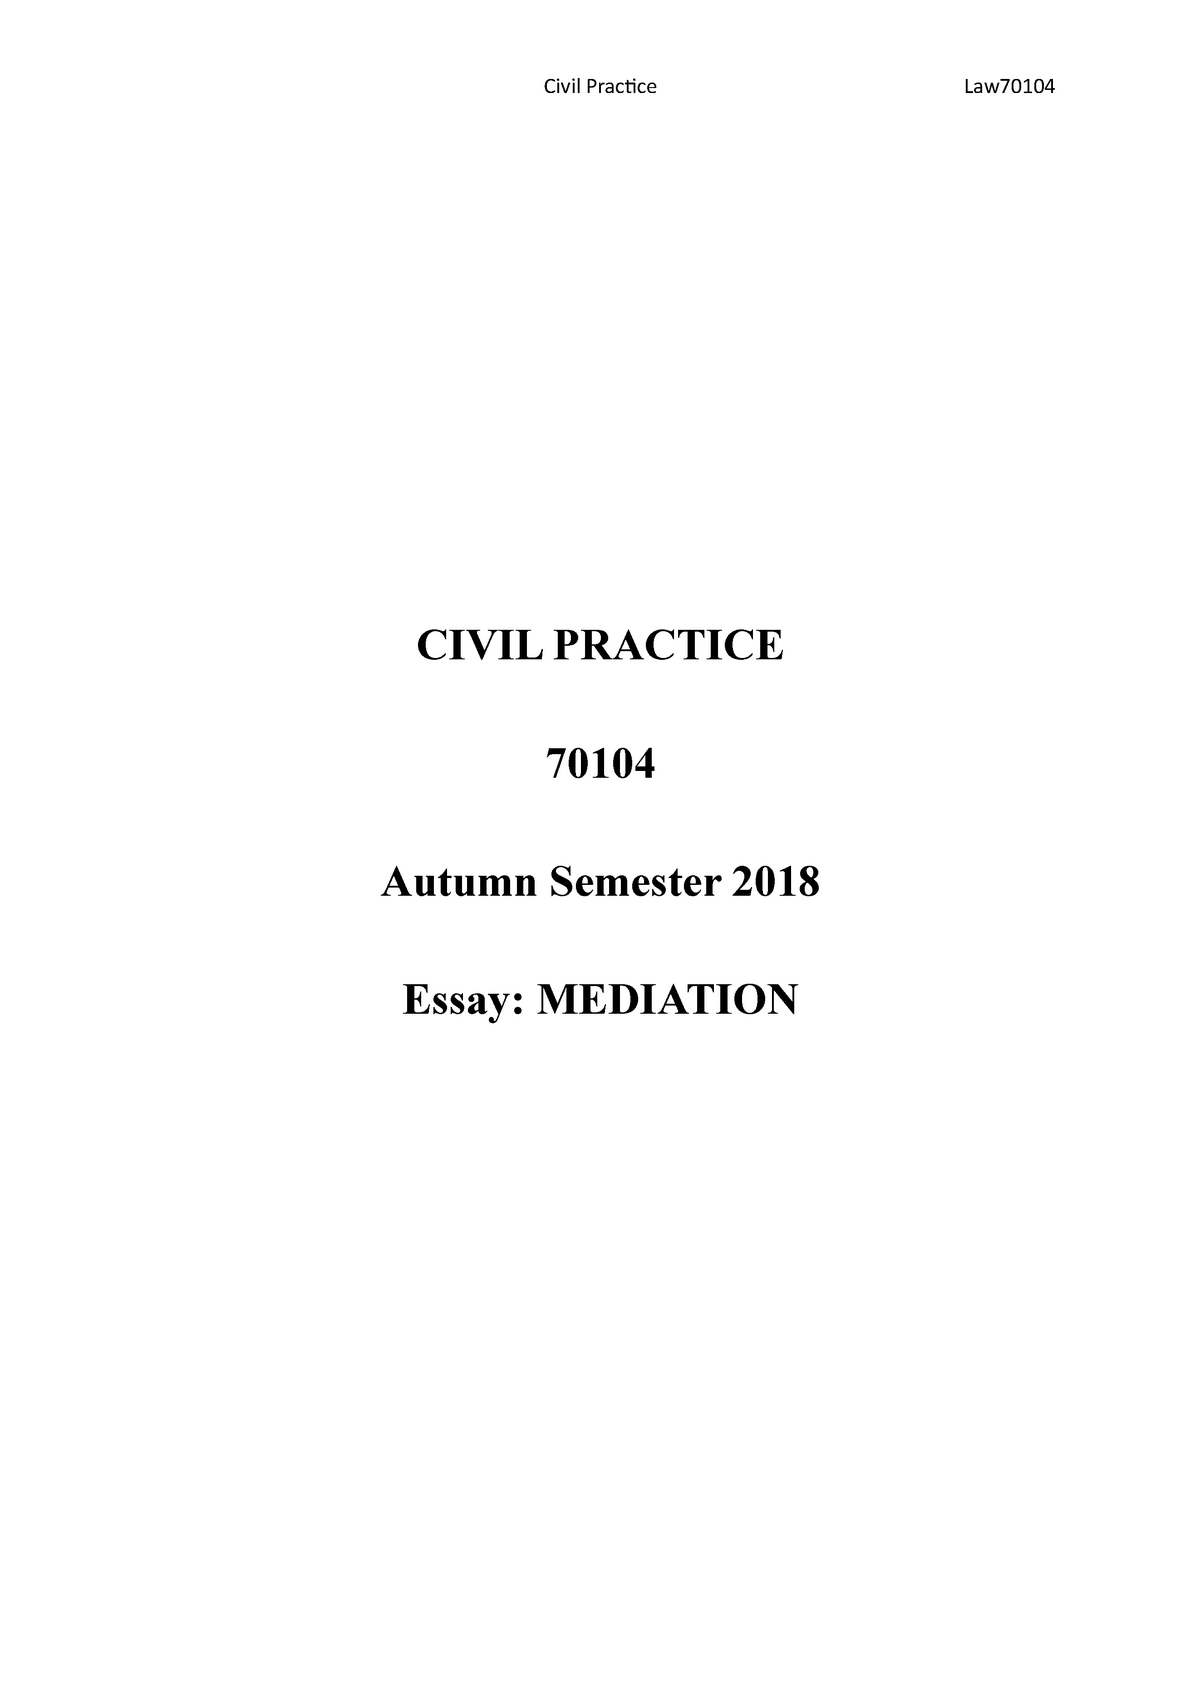 essay about mediation